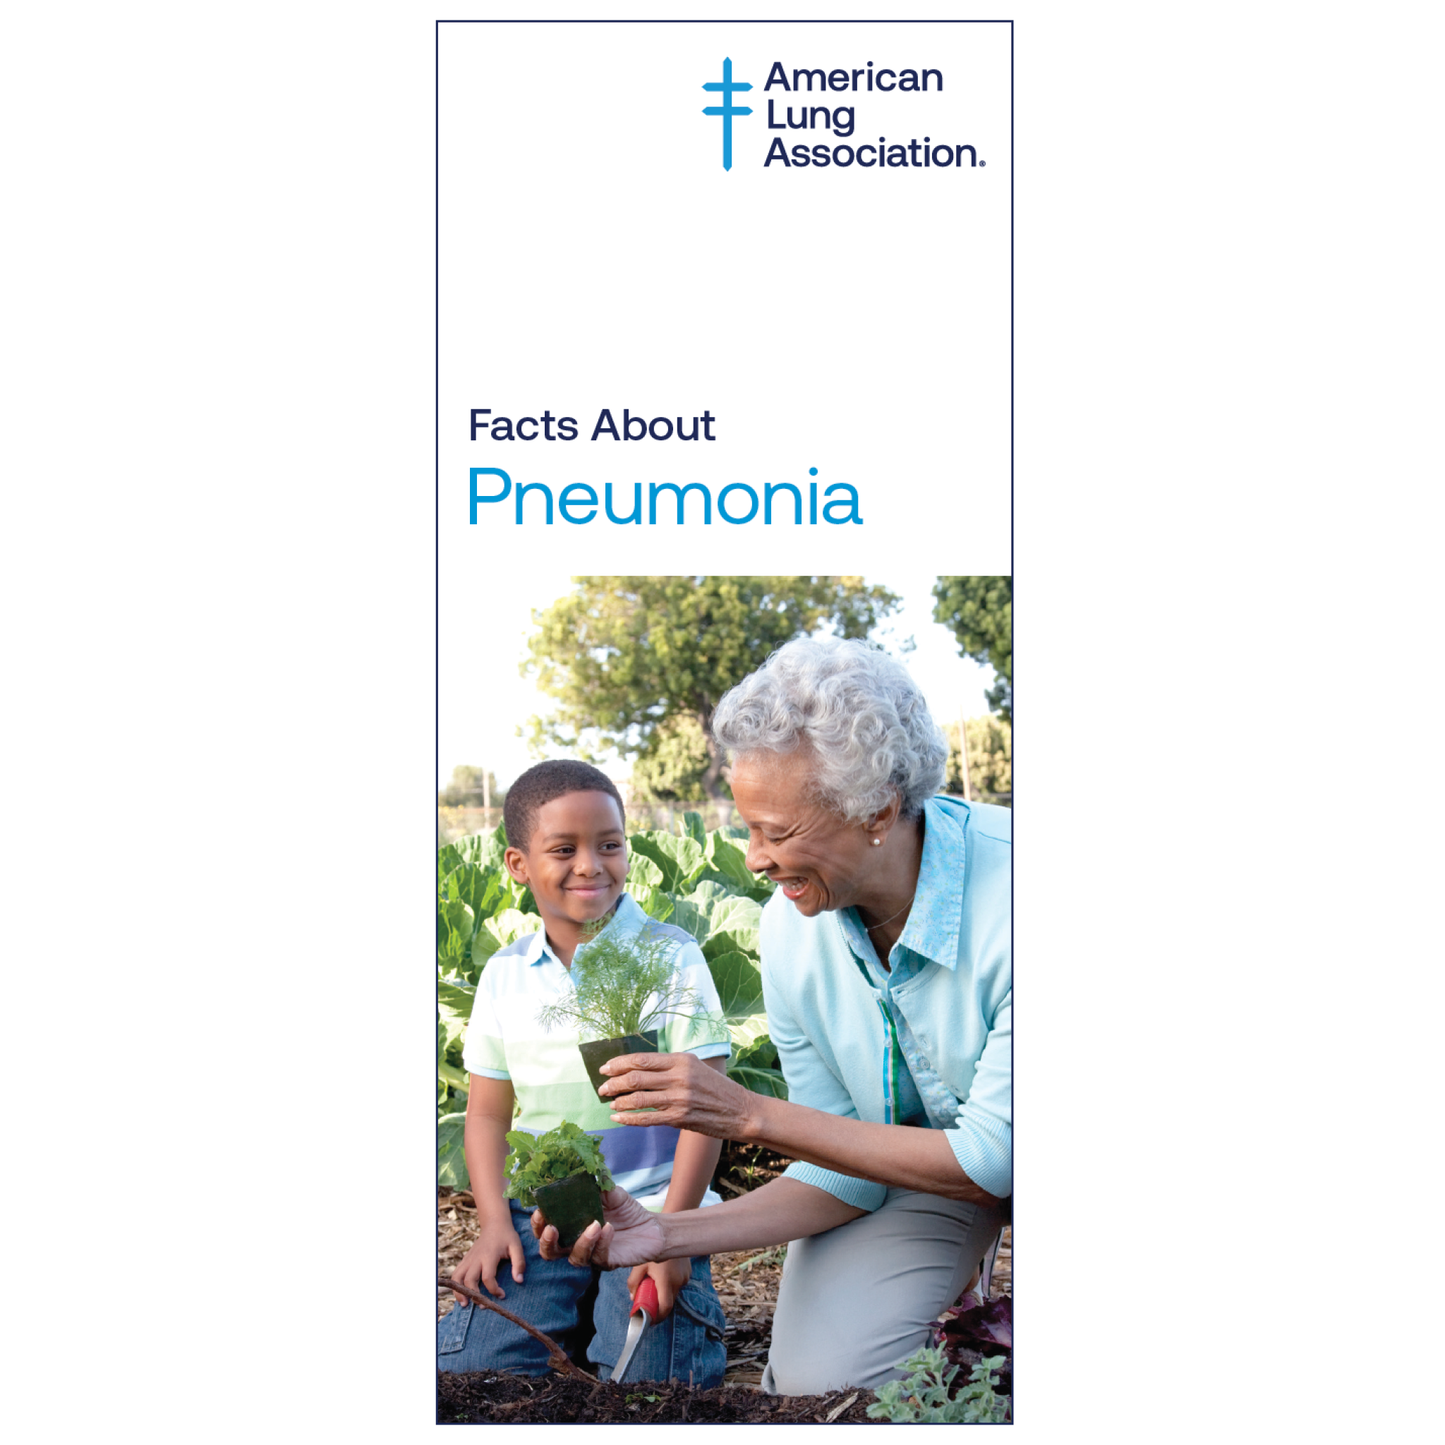 Facts About Pneumonia